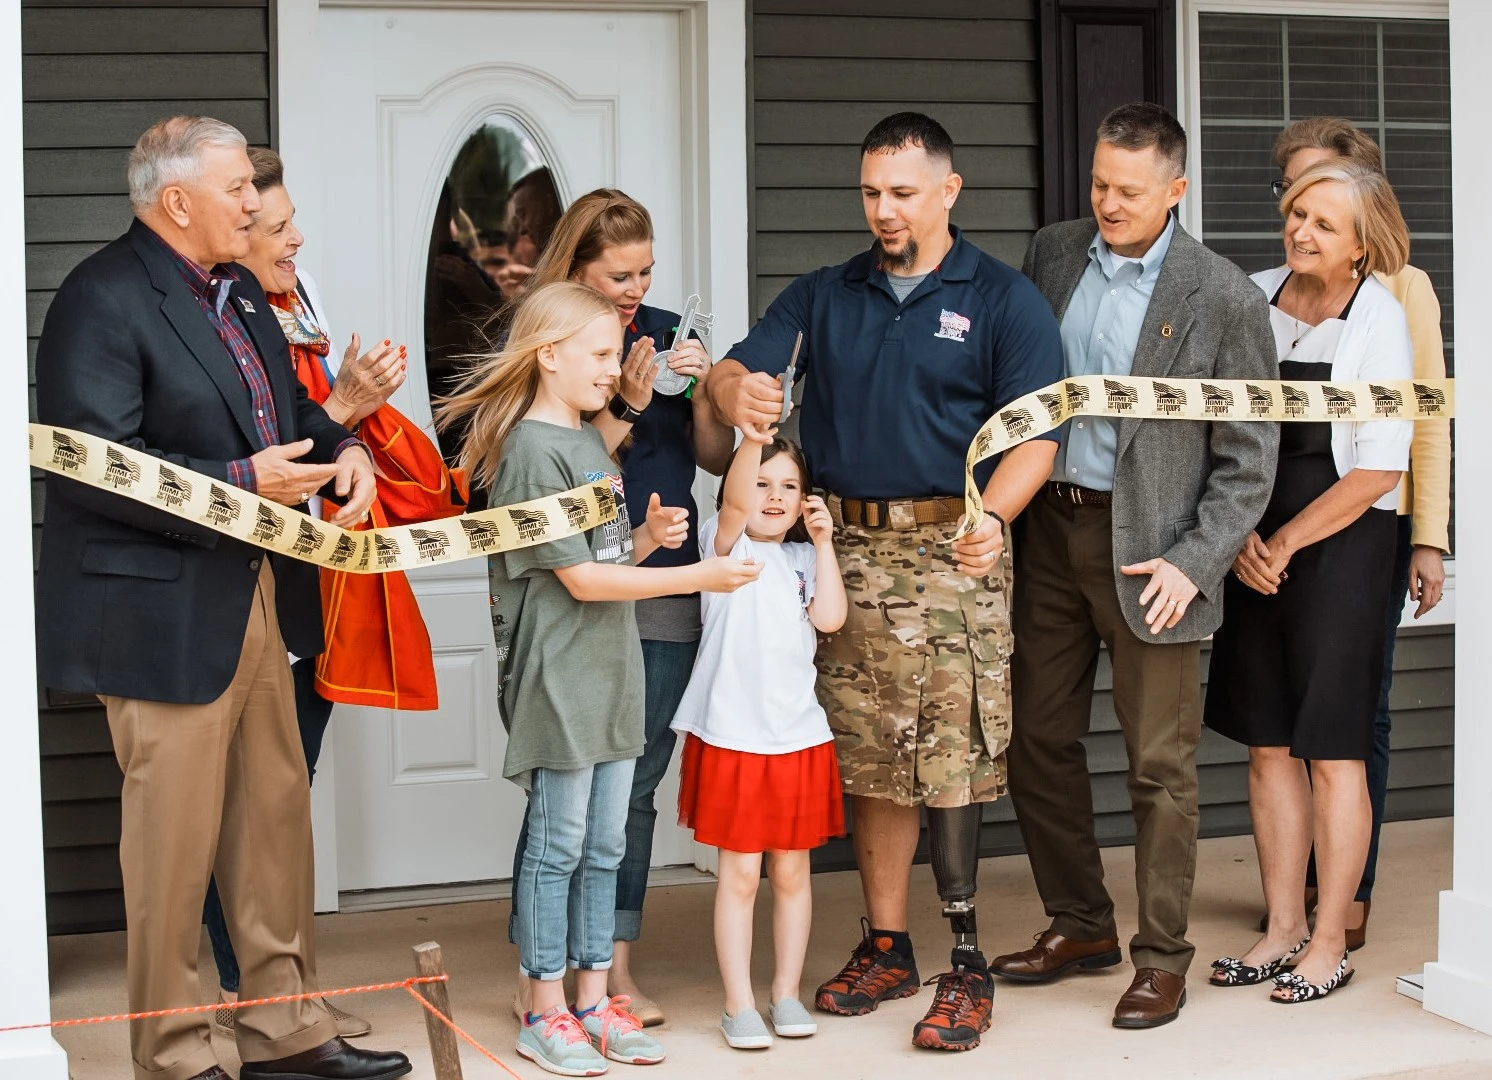 Homes For Our Troops ribbon-cutting ceremony for Army Sgt. Steven Curry 's specially adapted custom home. Photo courtesy of HFOT. 